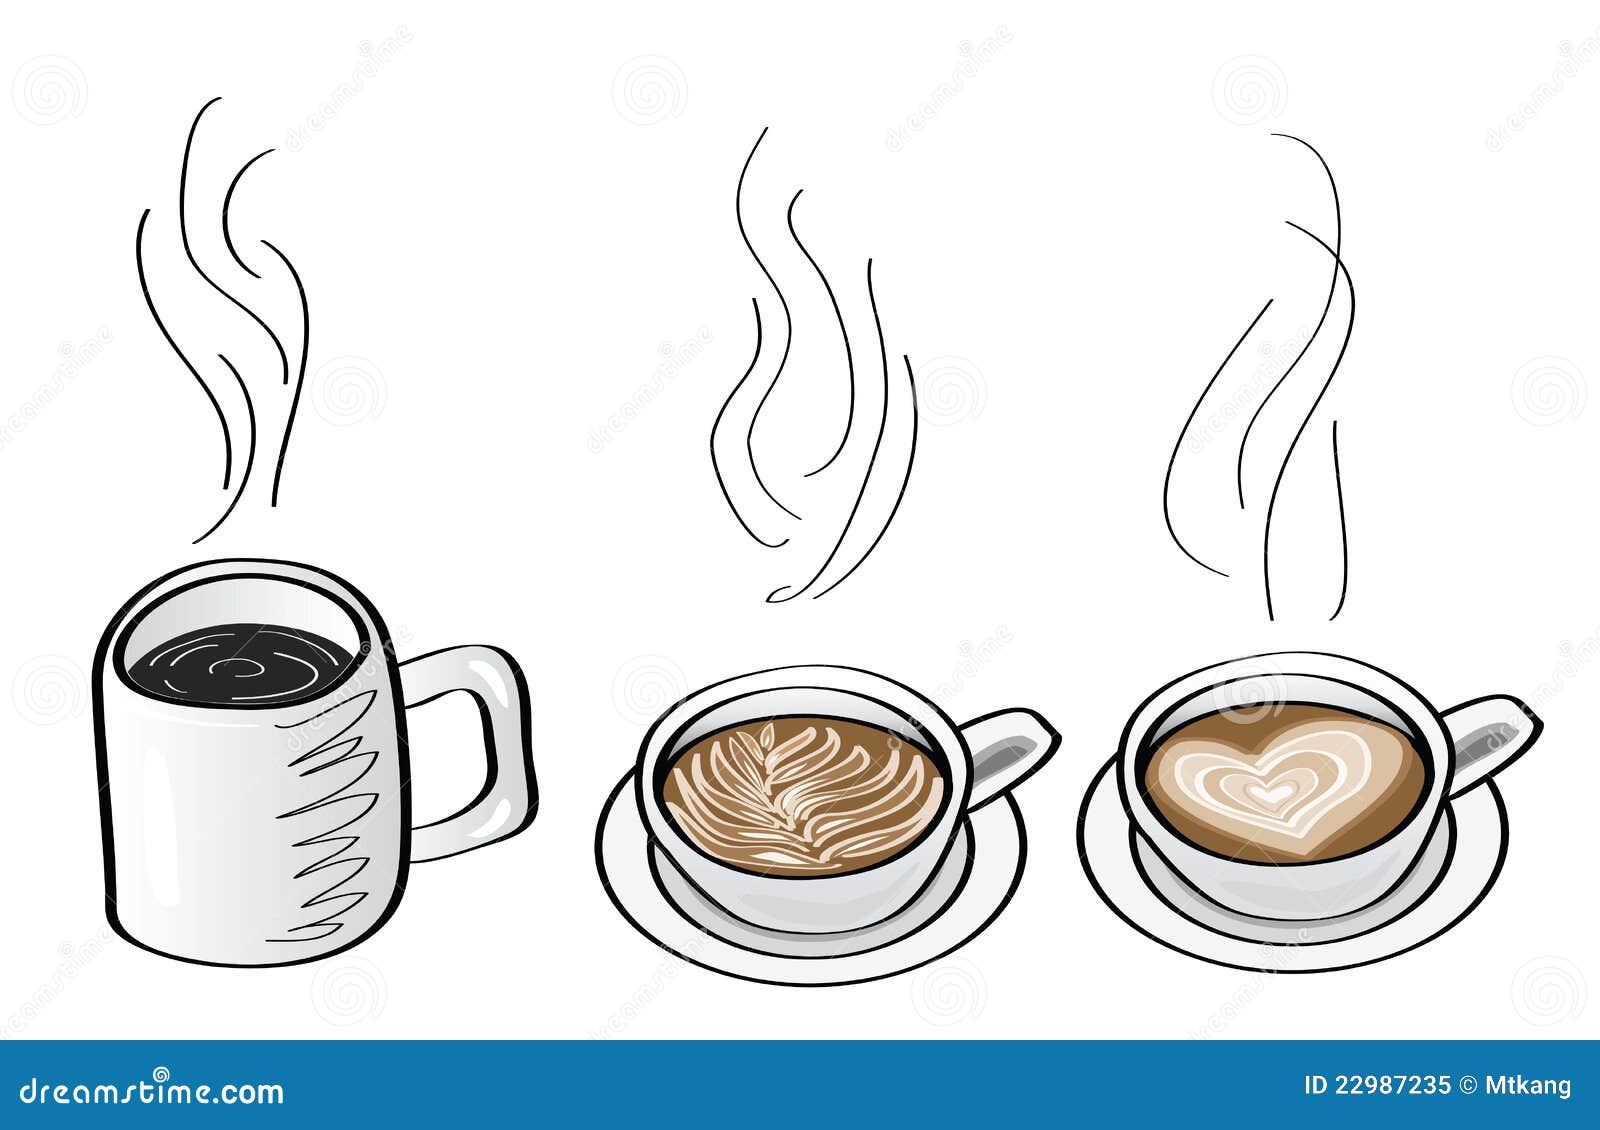 Doodle Illustrations Of Coffee Drink Stock Illustration